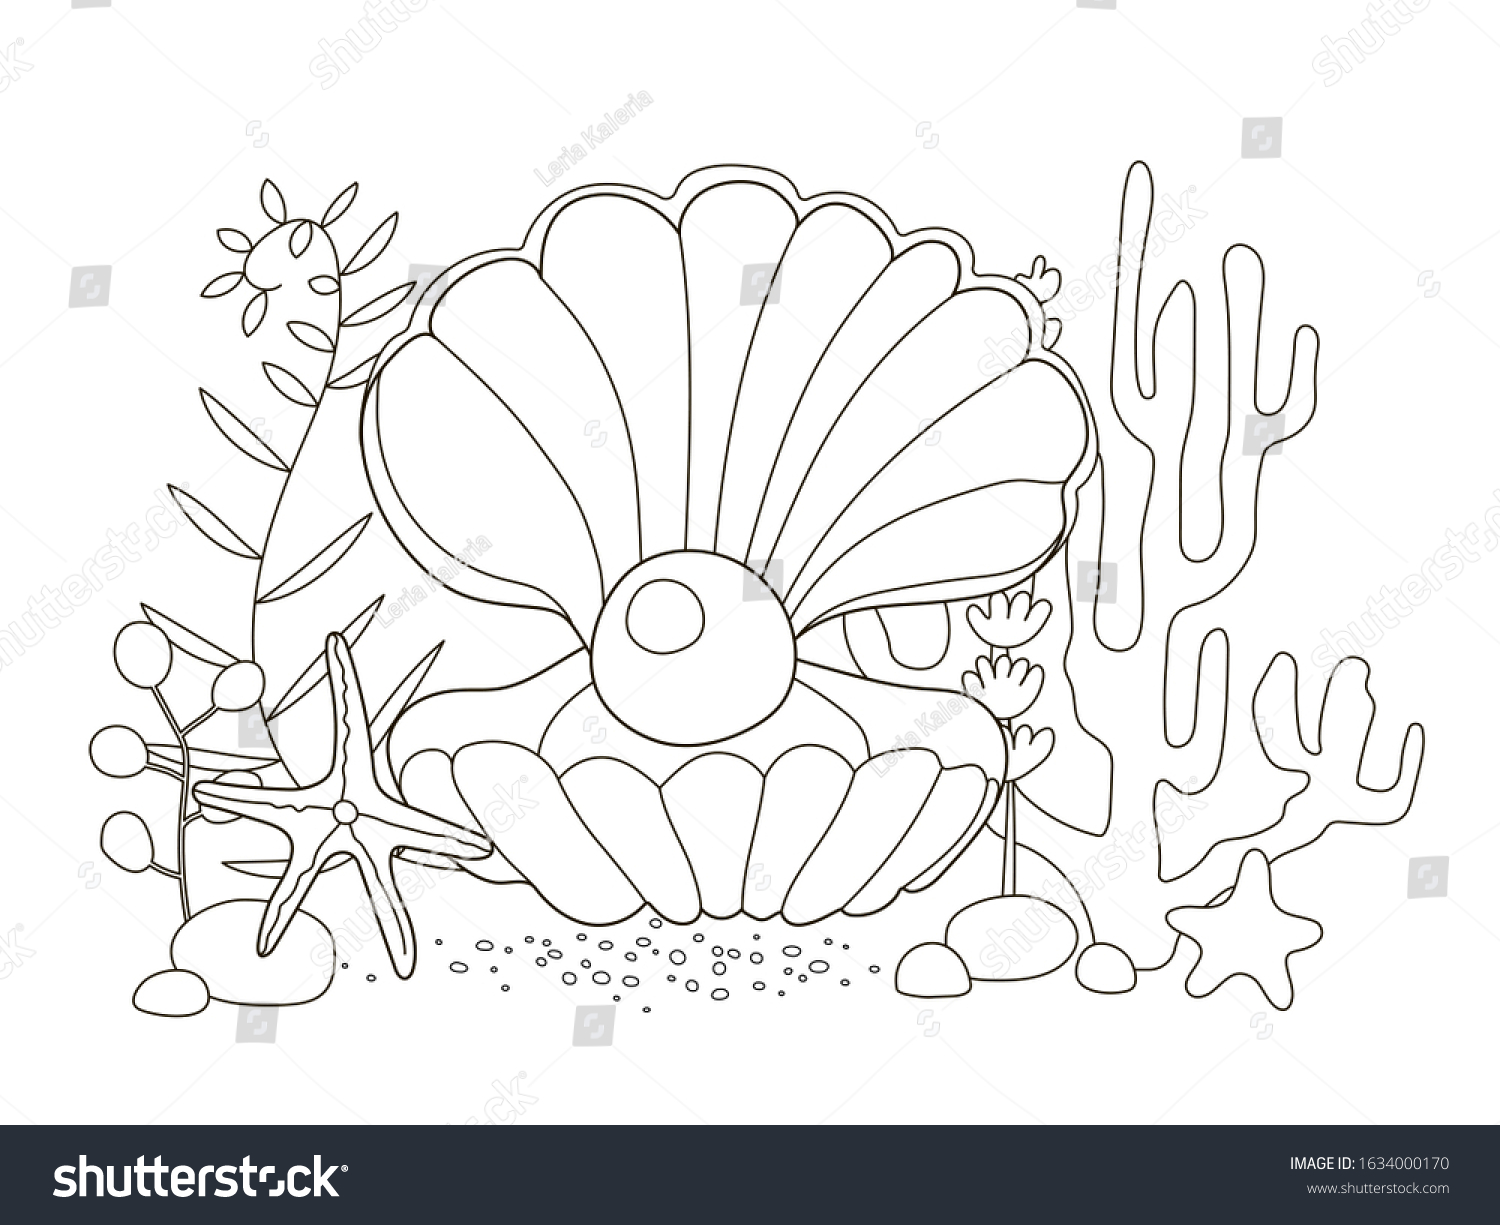 Shells coloring page images stock photos d objects vectors